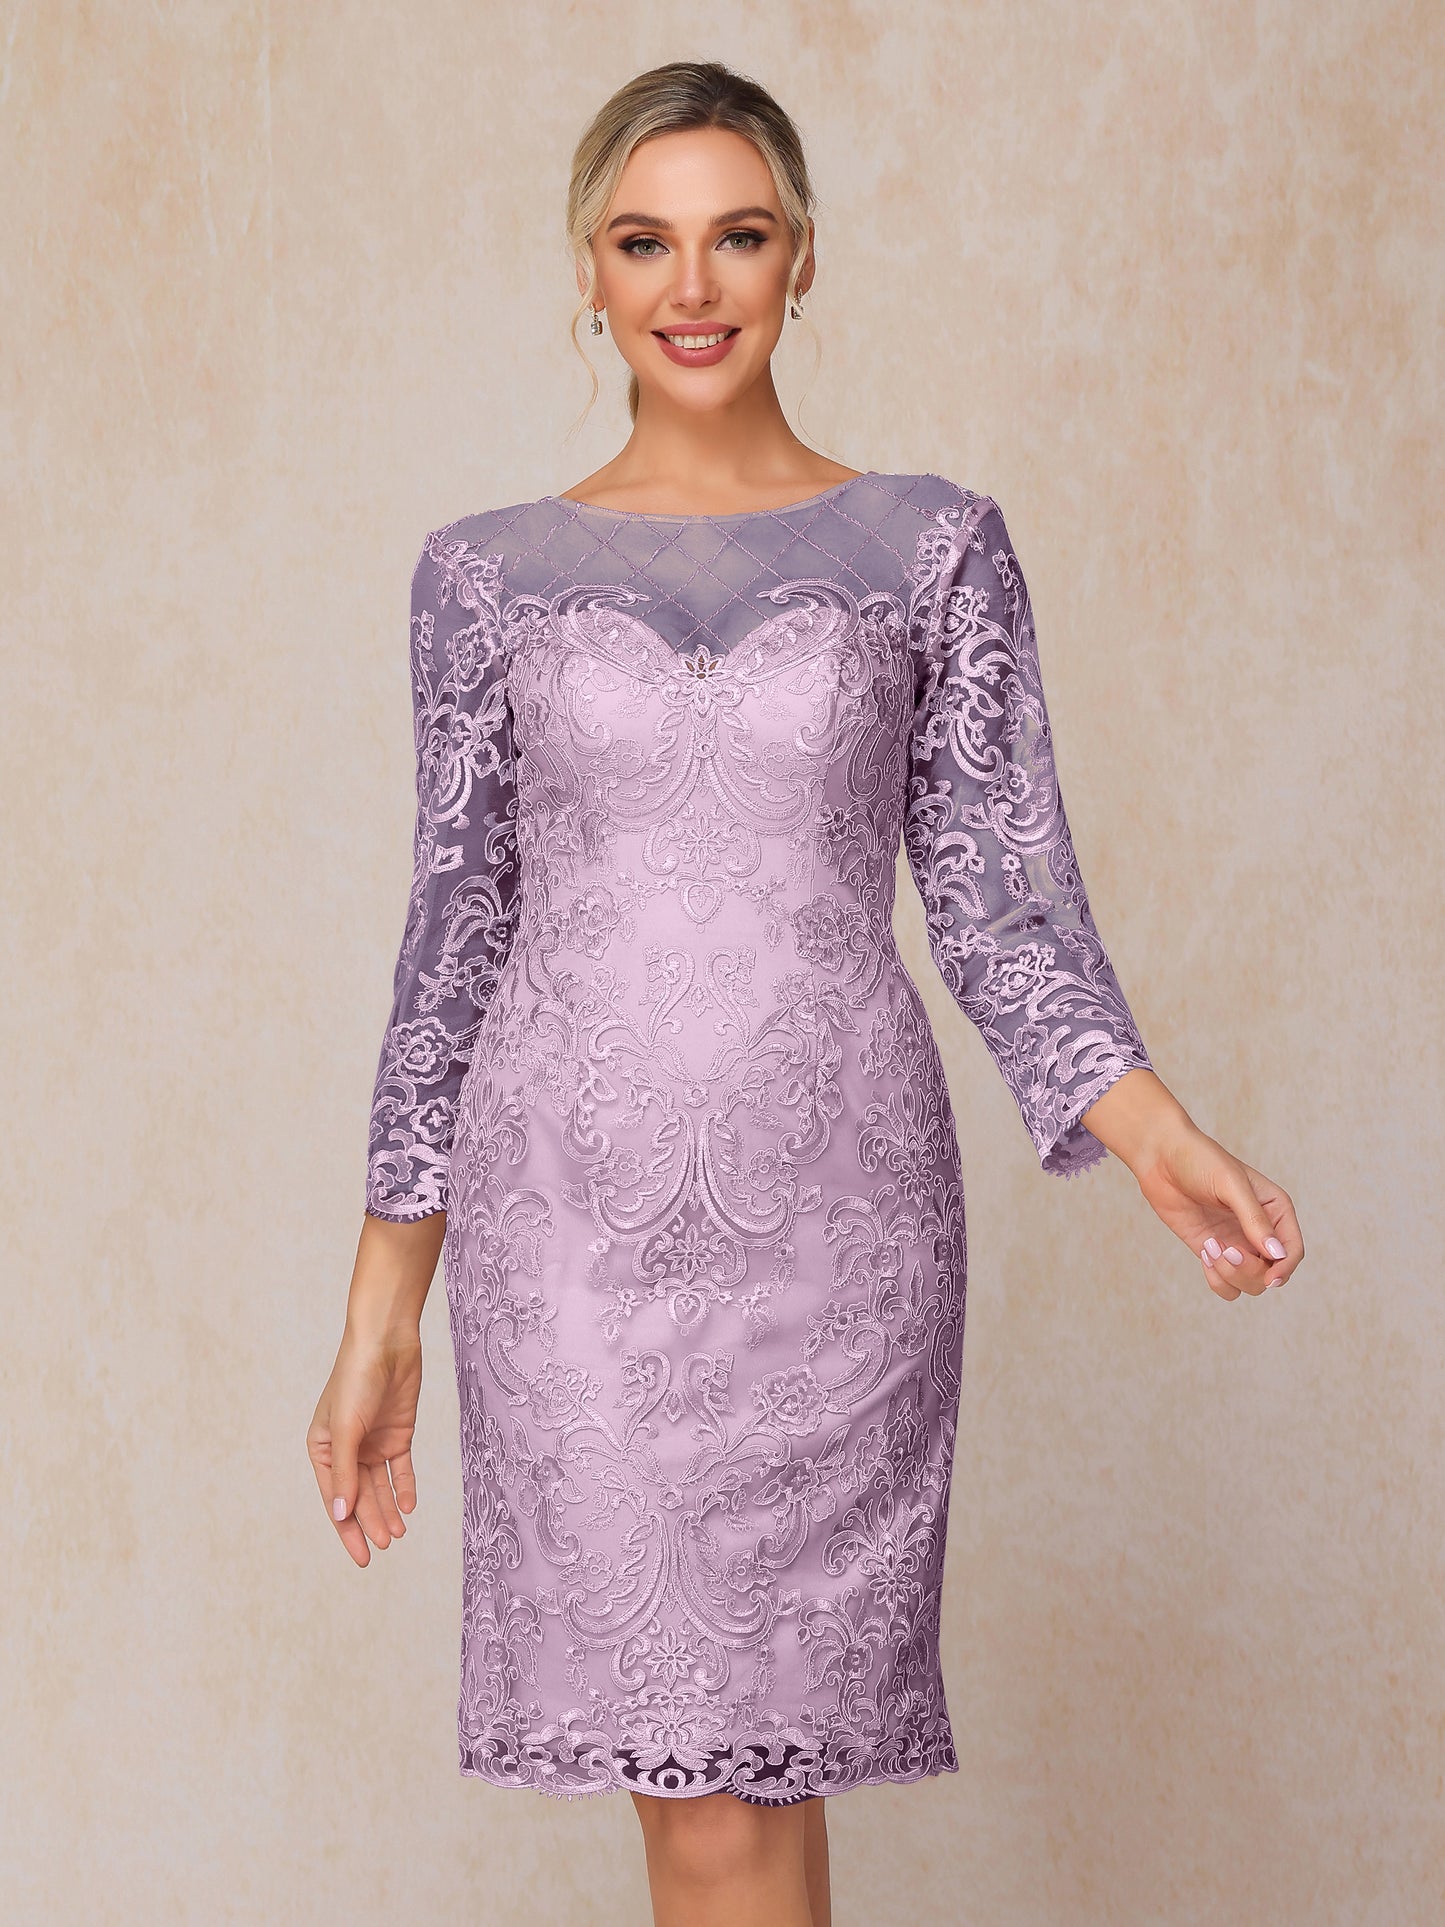 2 Pieces 3/4 Sleeves Knee Length Chiffon Lace Mother Of The Bride Dress